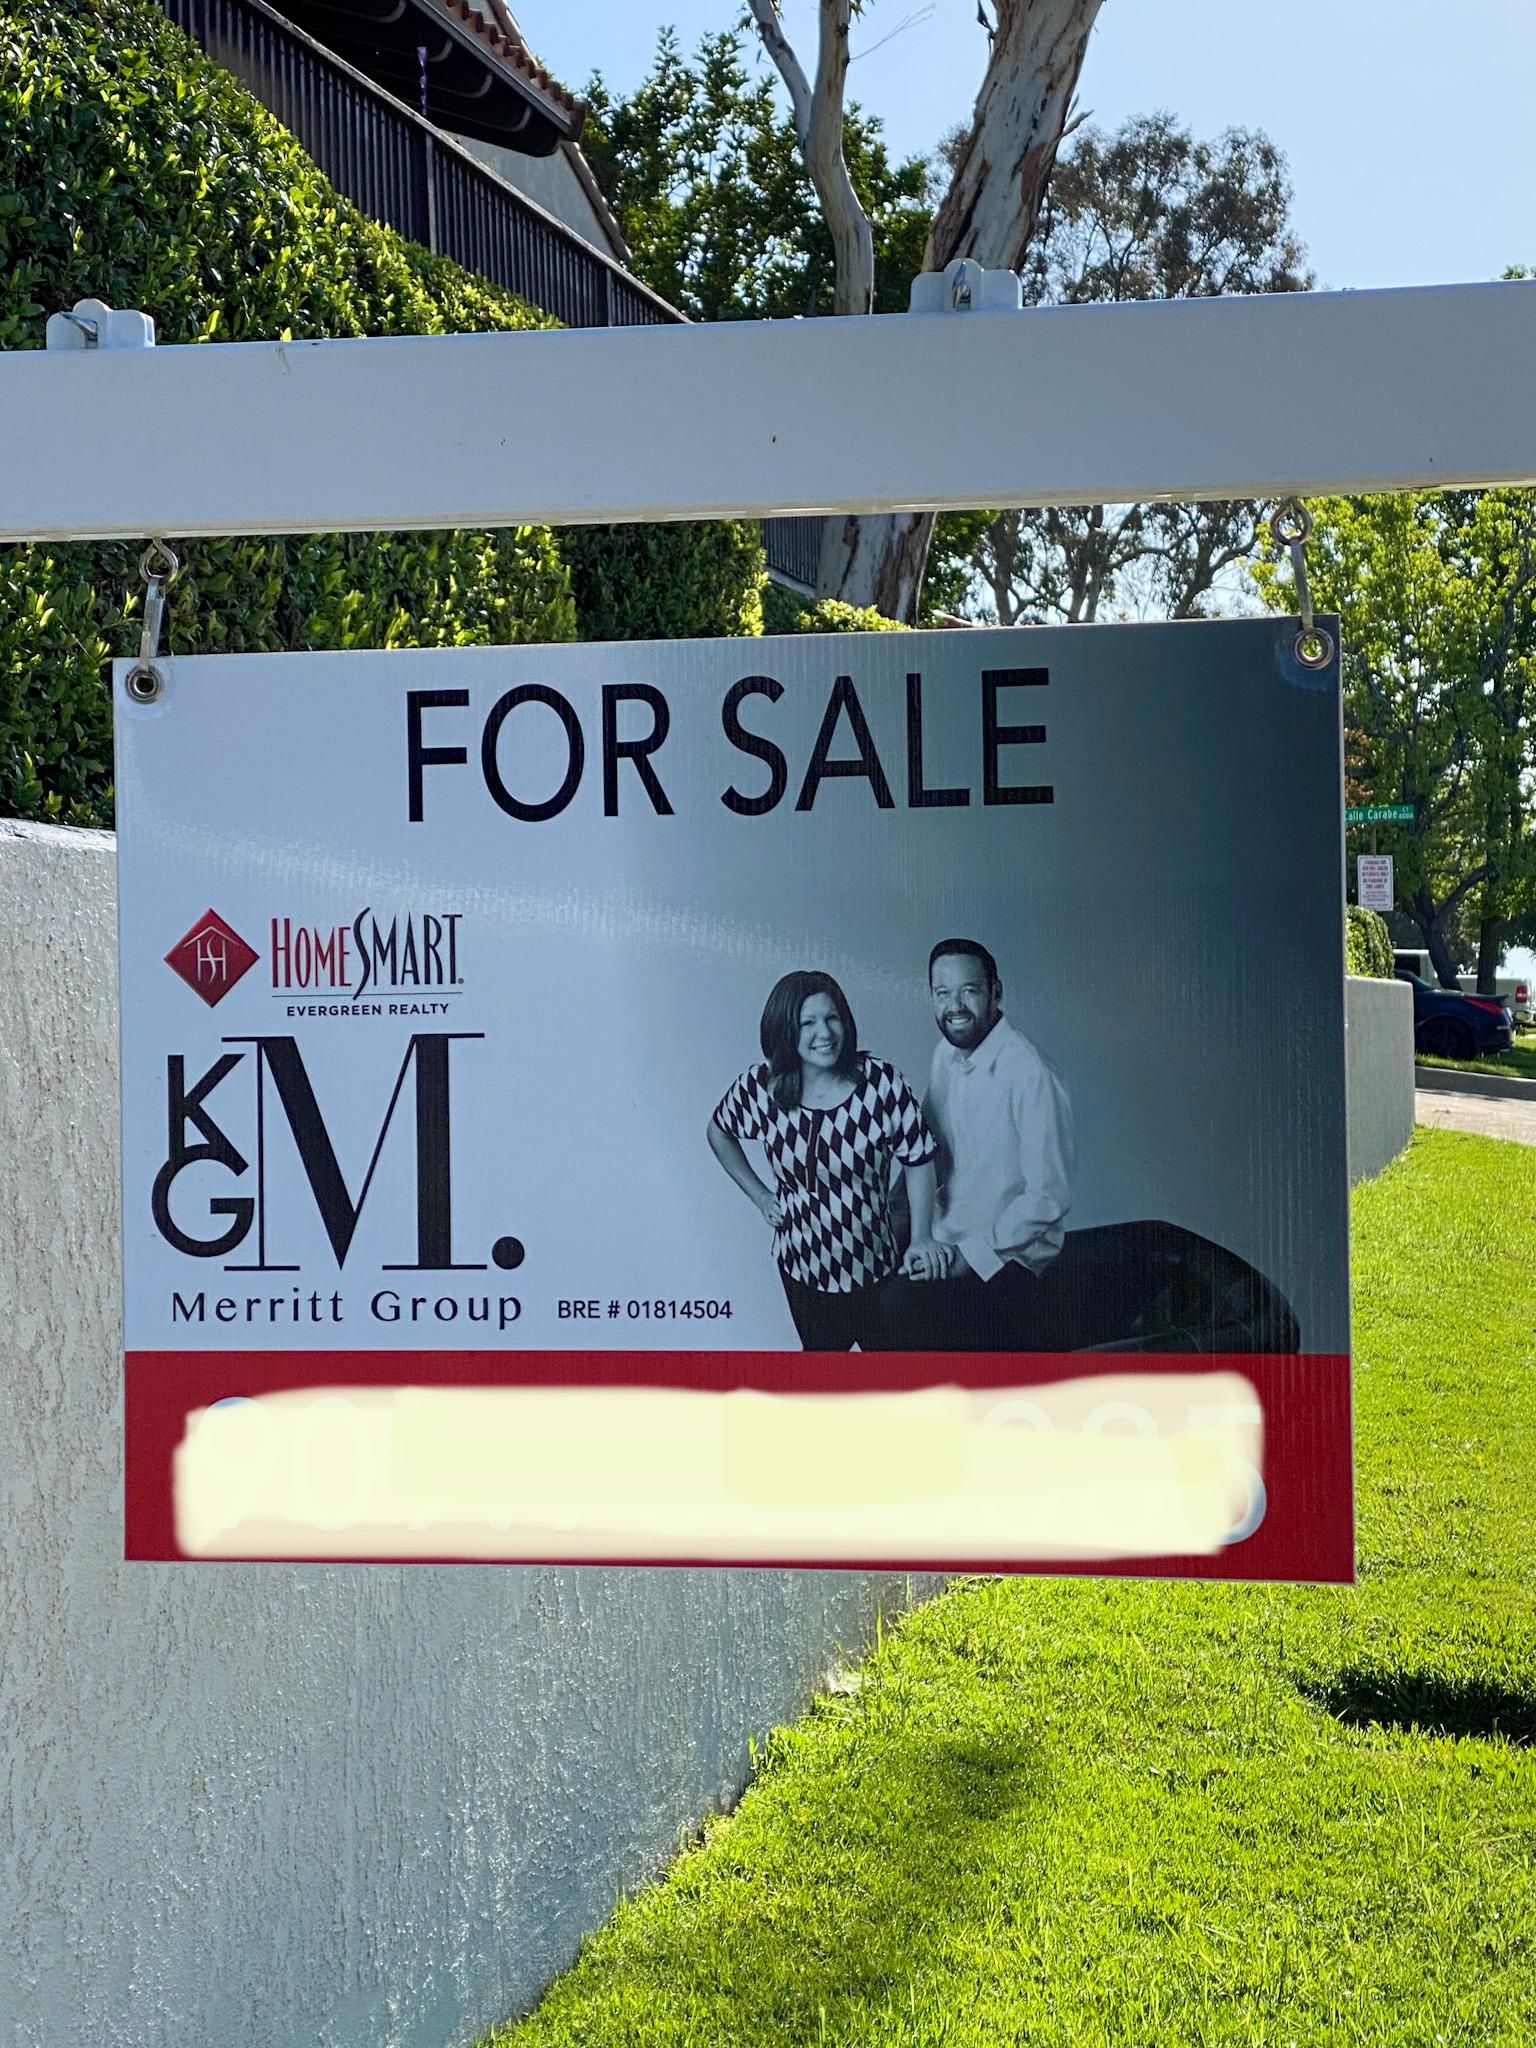 At first glance I was excited a woman and her mythical creature husband were selling a home in my neighborhood.